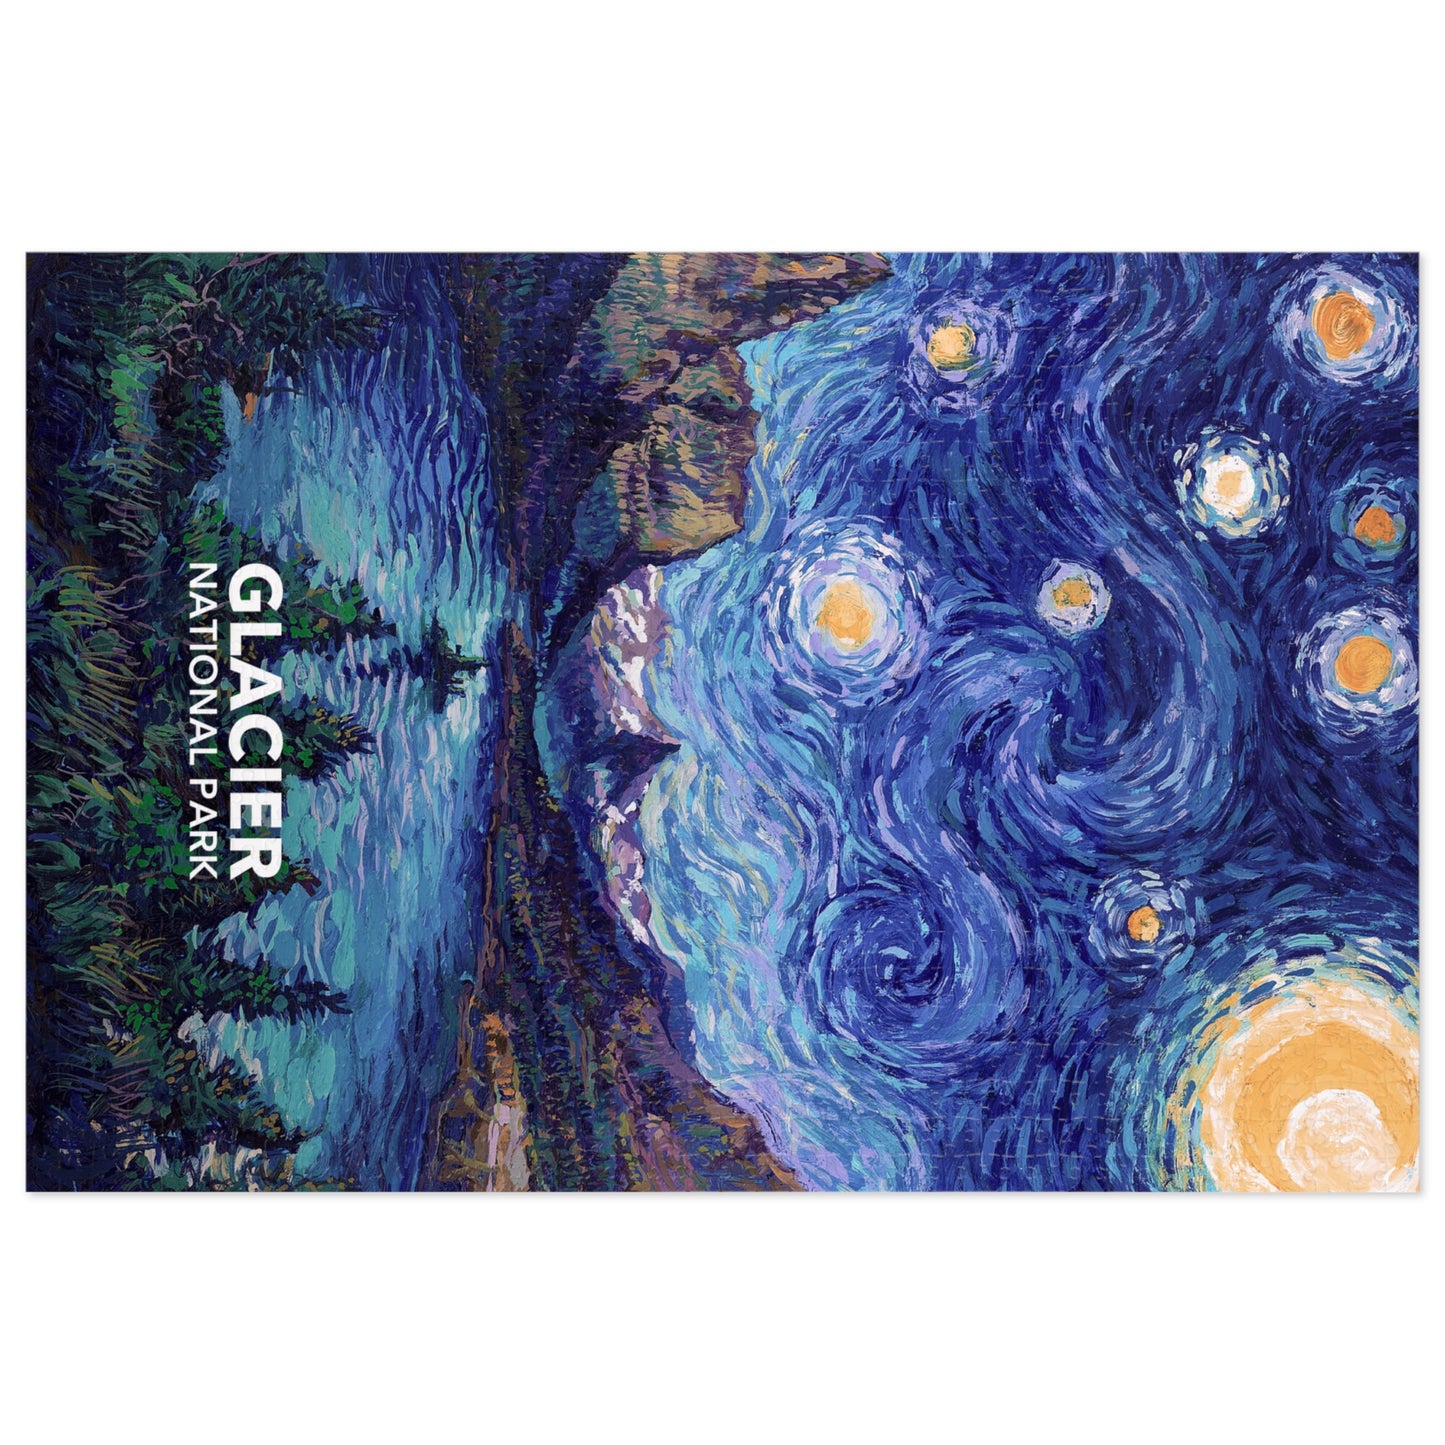 Glacier National Park Jigsaw Puzzle - The Starry Night